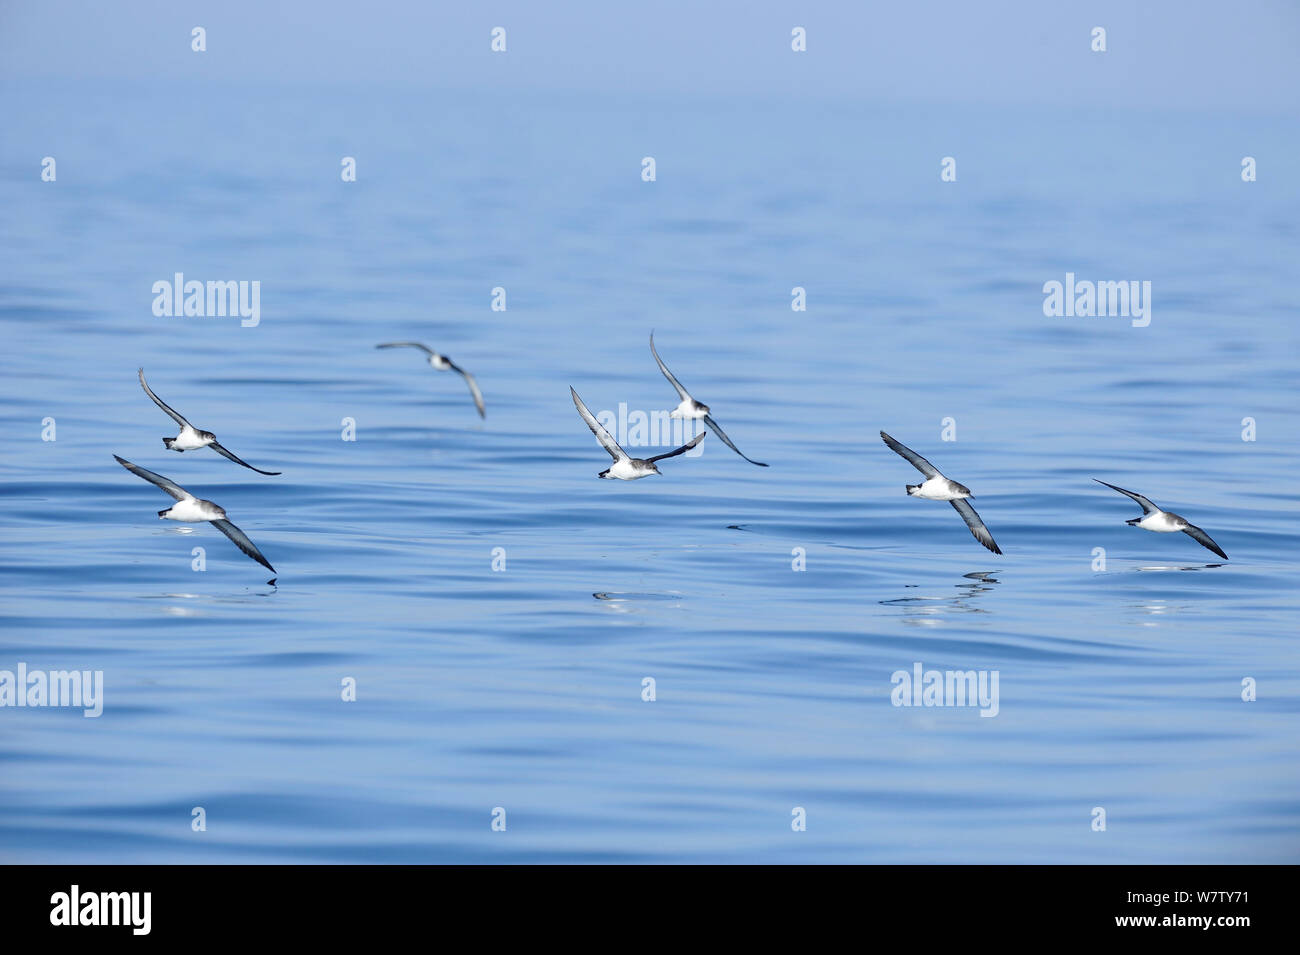 Manx Shearwater (Puffinus puffinus) group in flight skimming low over the sea, off coast of Anglesey, North Wales, UK. Stock Photo